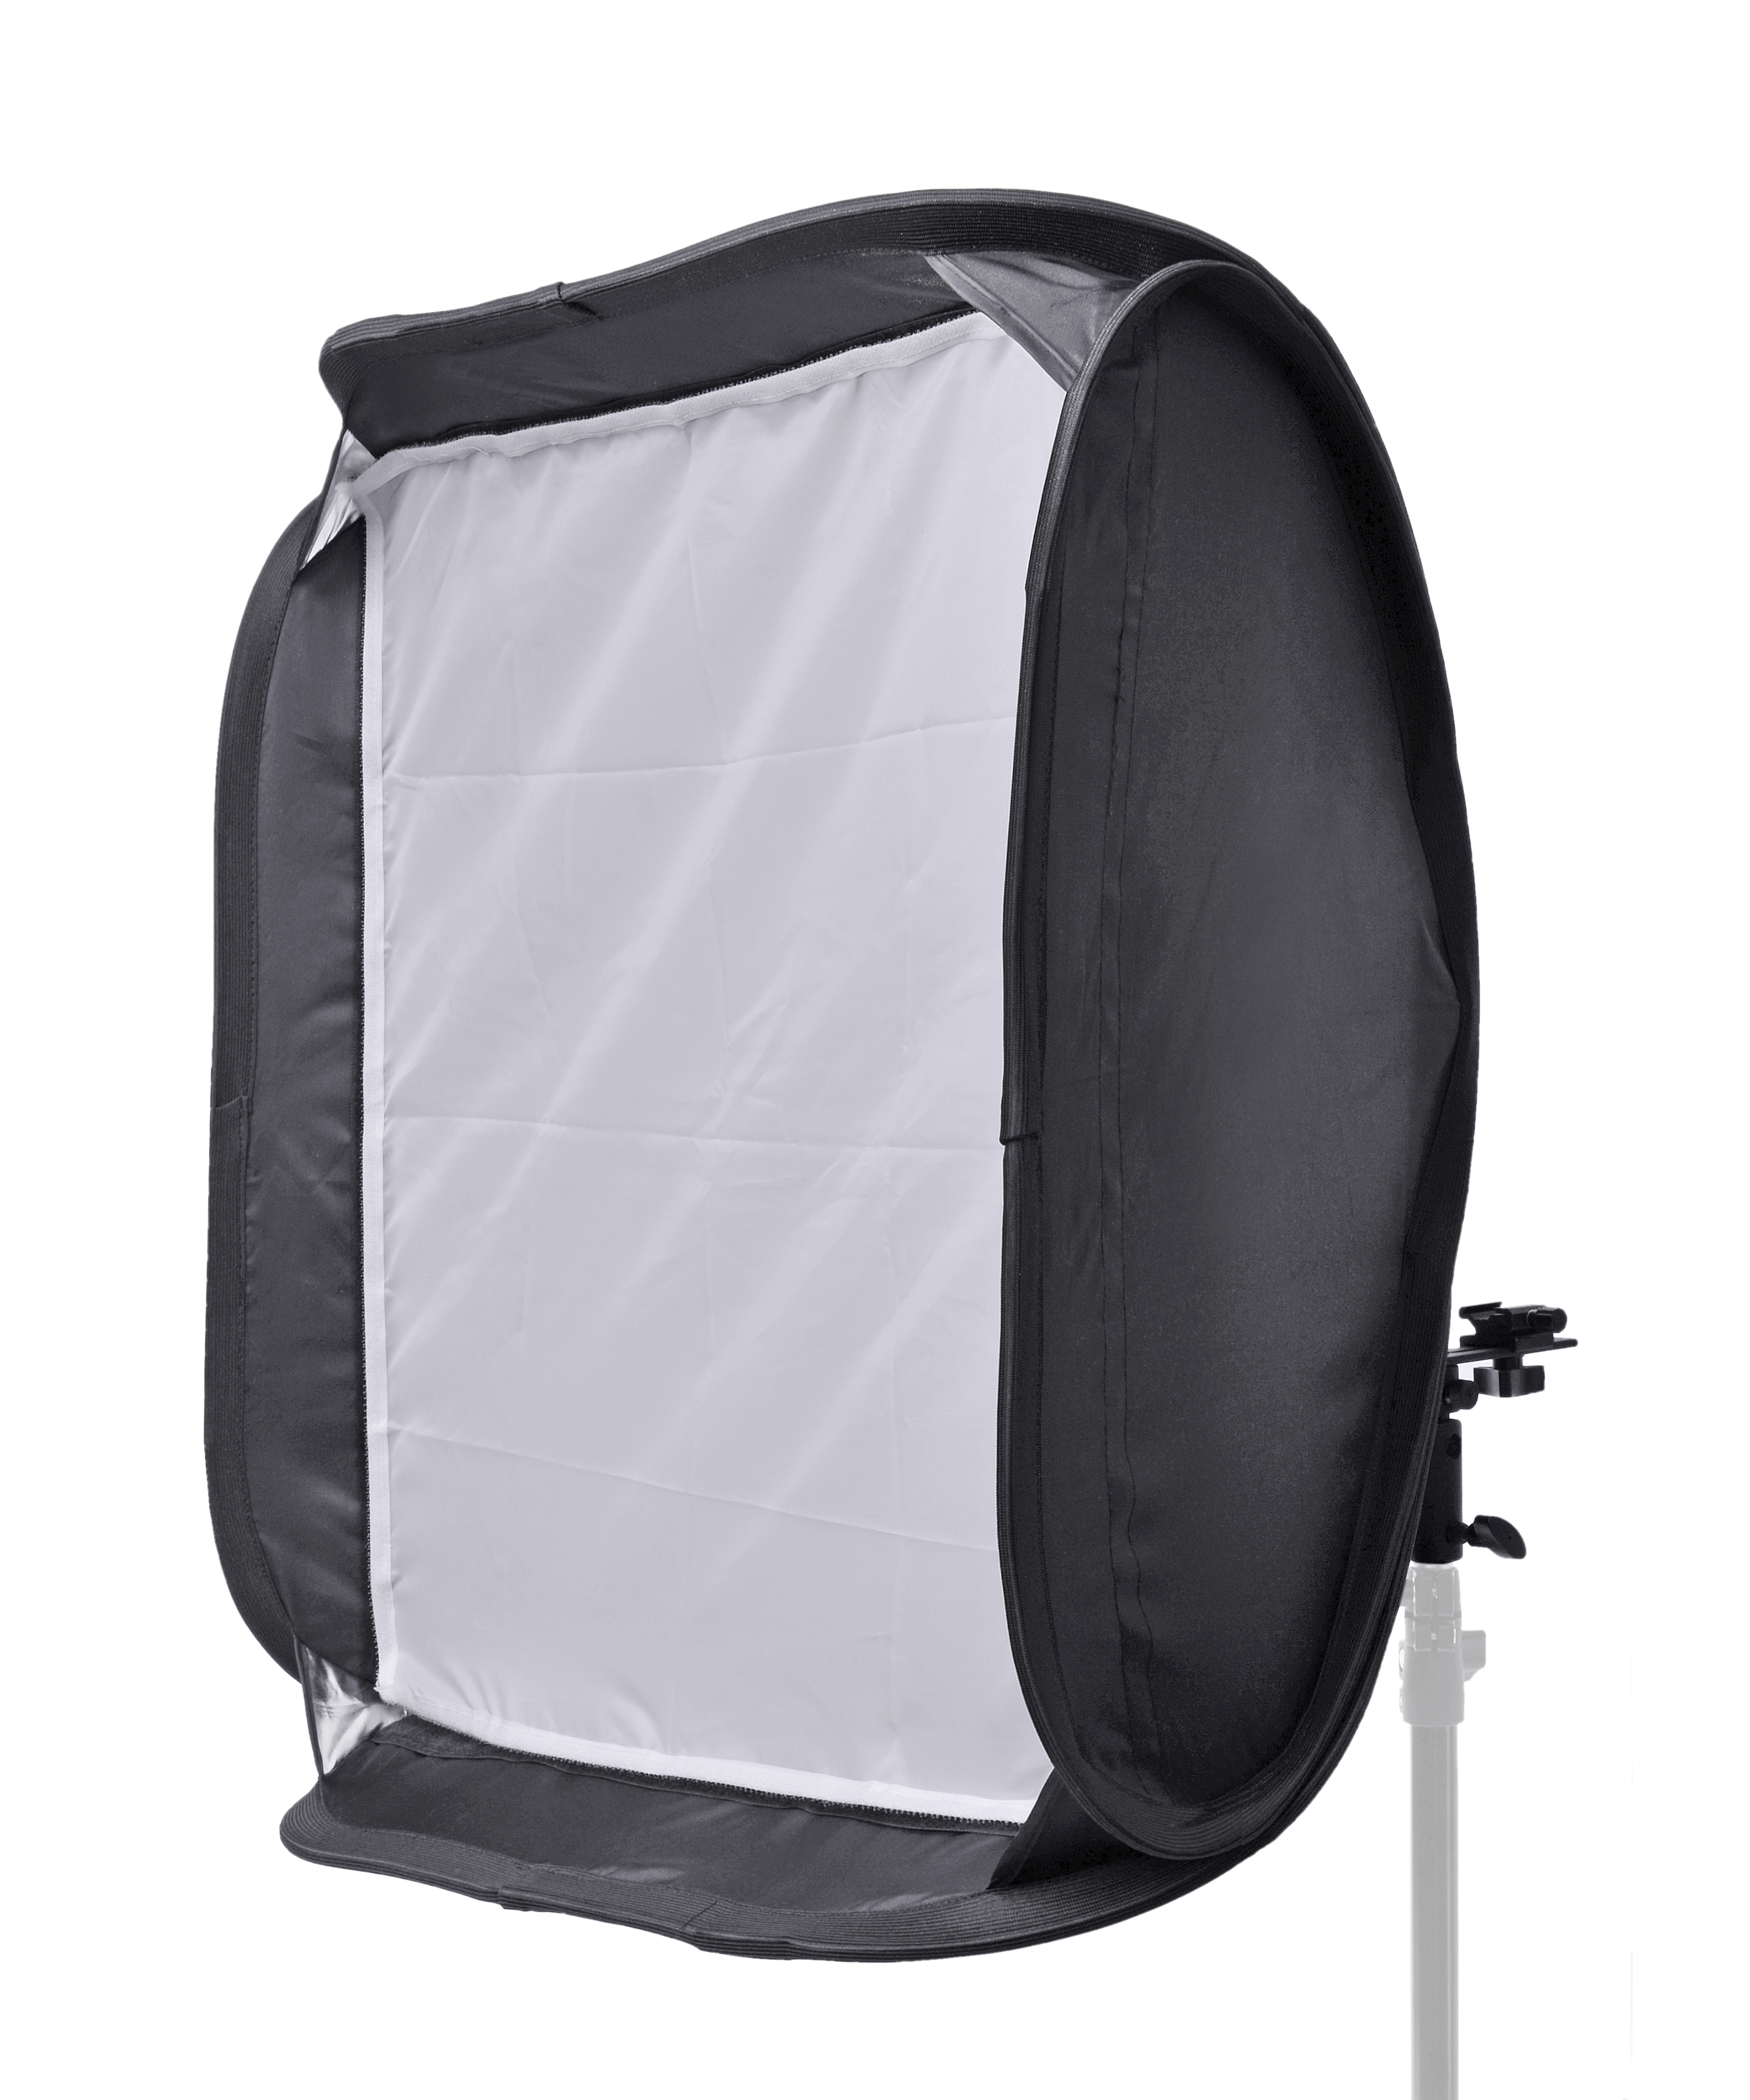 BRESSER SS-14 Softbox for Camera Flashes 60x60cm (Refurbished)